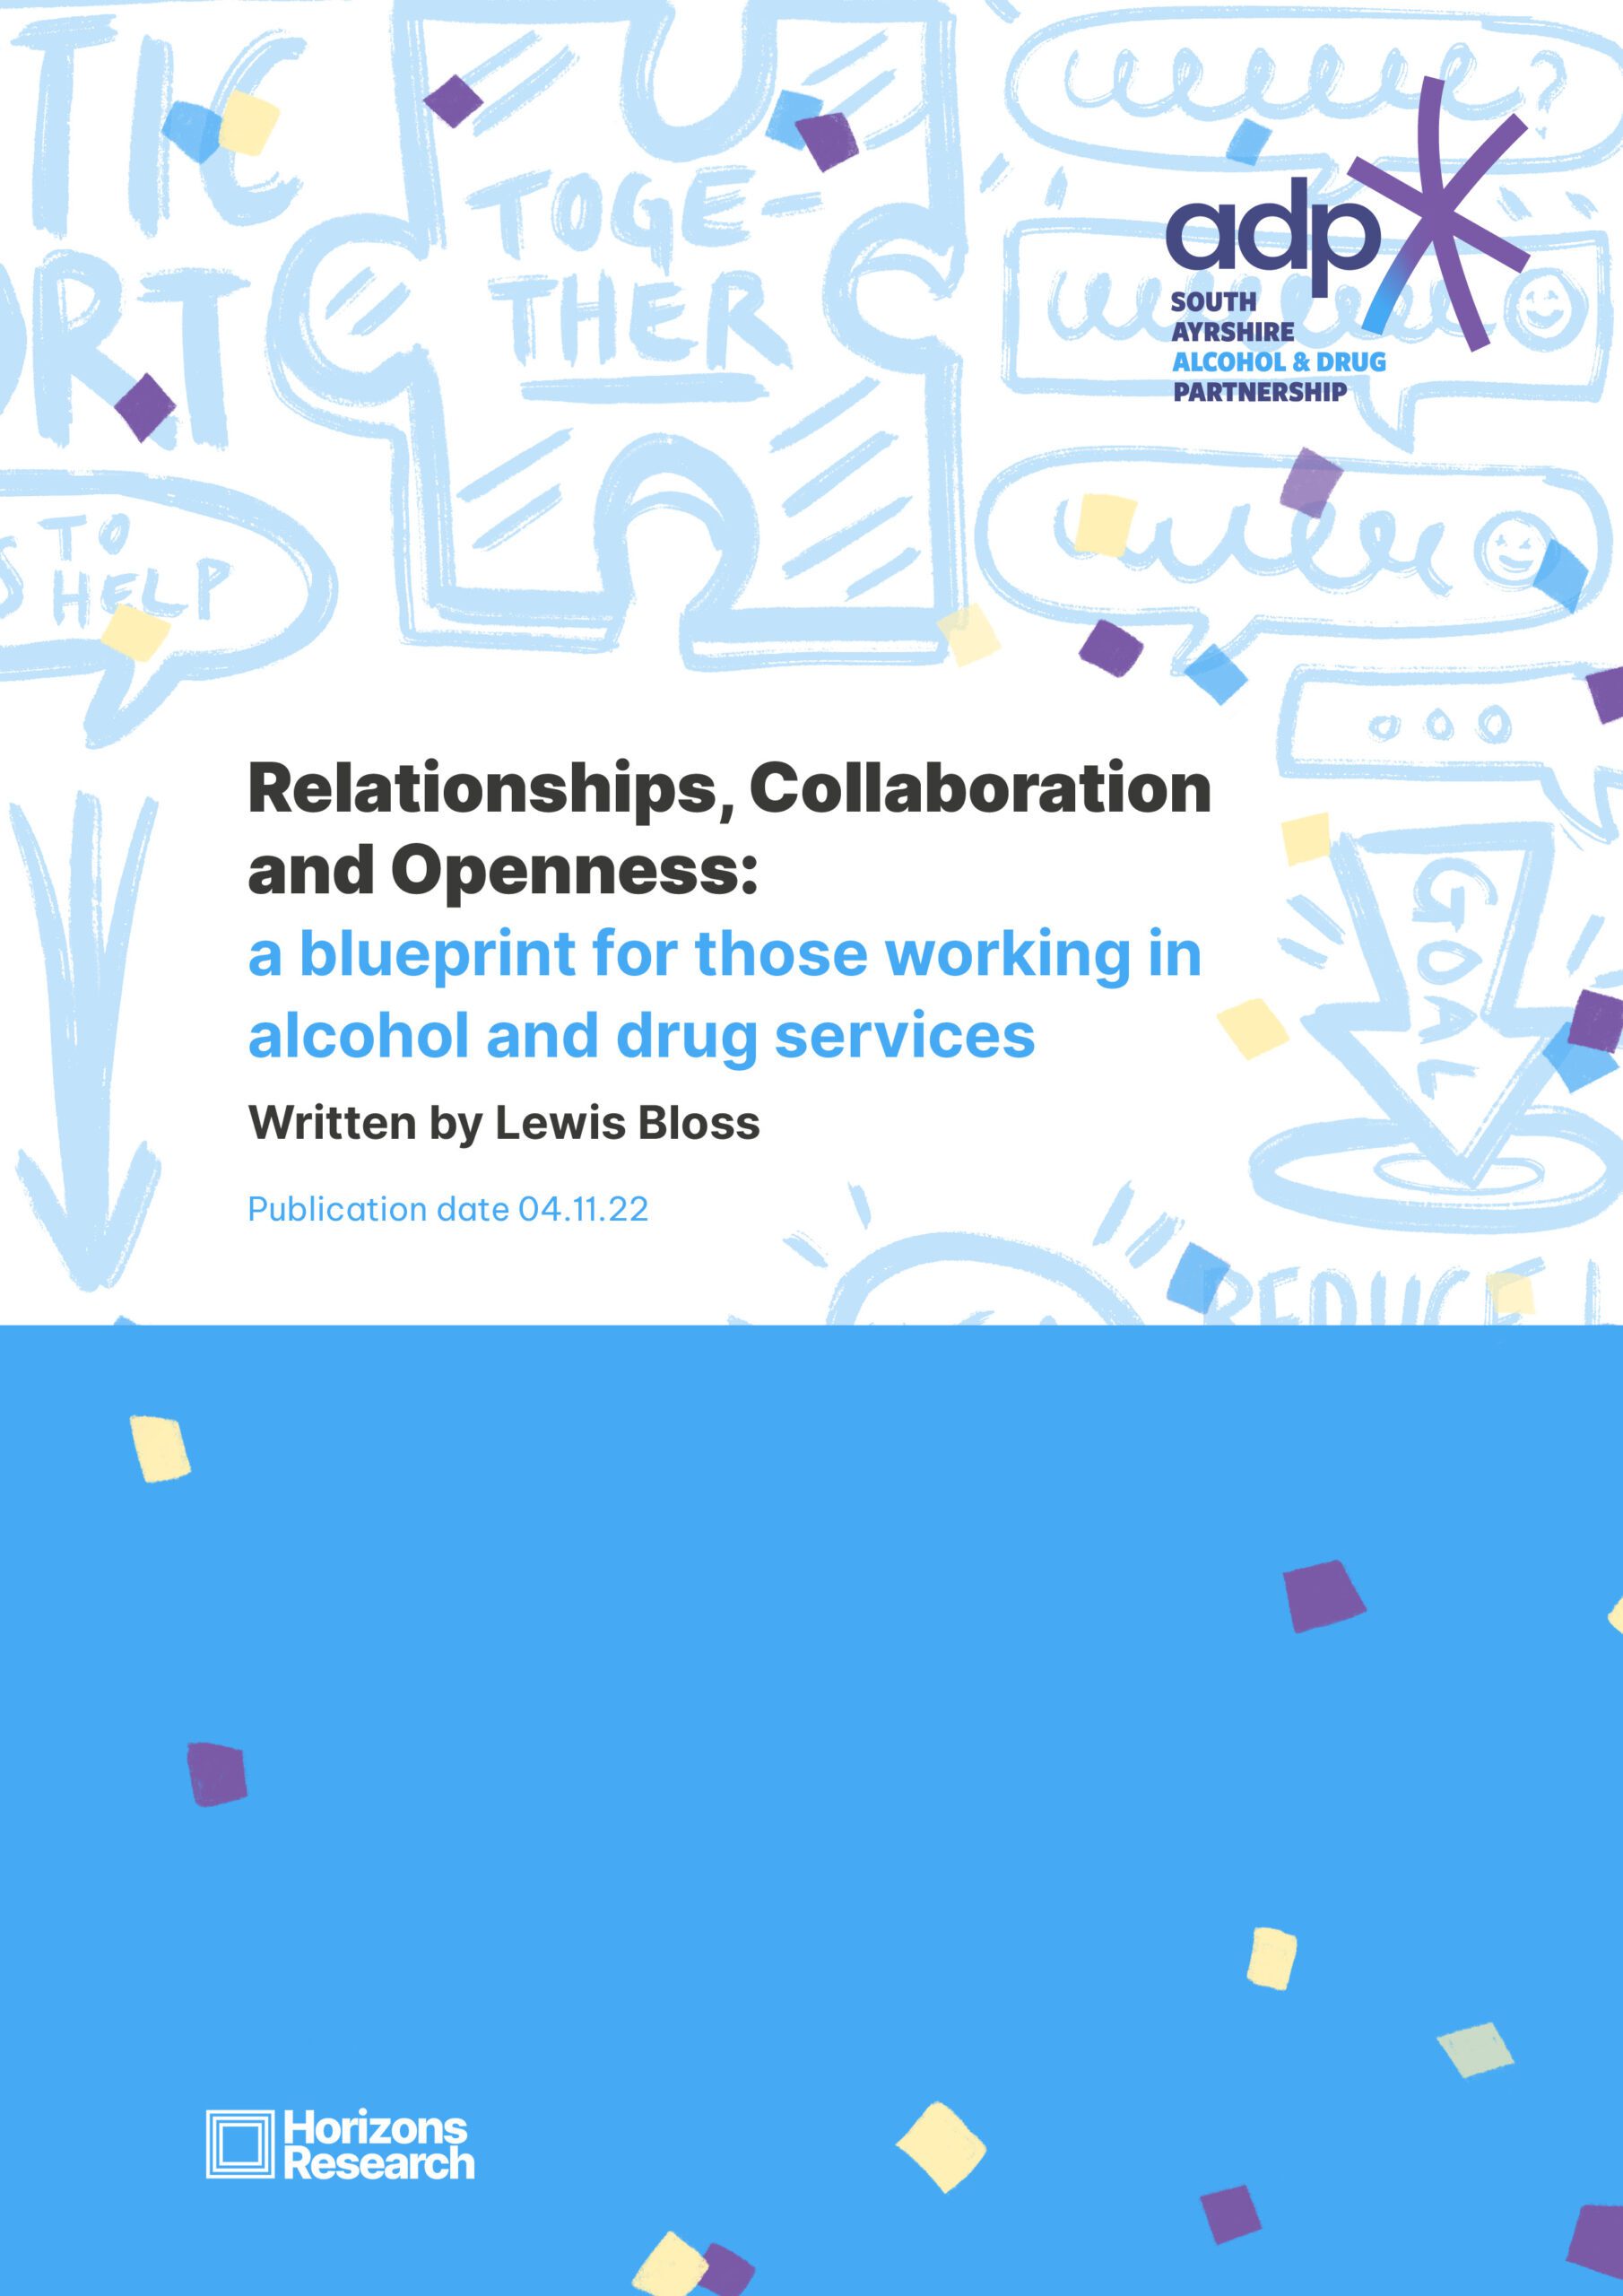 Relationships, Collaboration and Openness: a blueprint for those working in alcohol and drug services